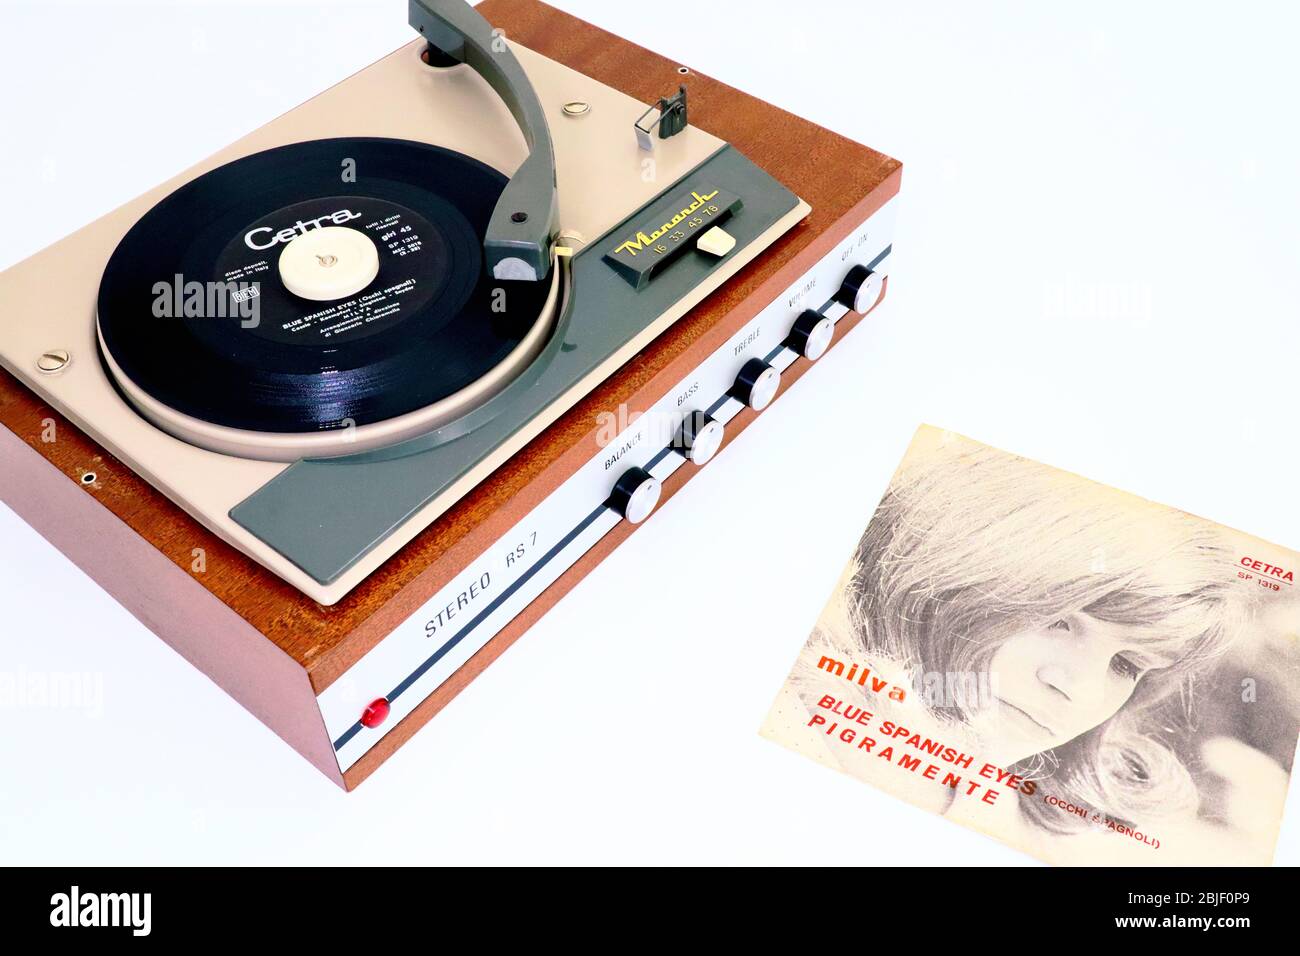 MILVA, Blue Spanish Eyes and Pigramente, 1966 Vinyl Record CETRA Label on 1966 MONARCH Record Player Stock Photo